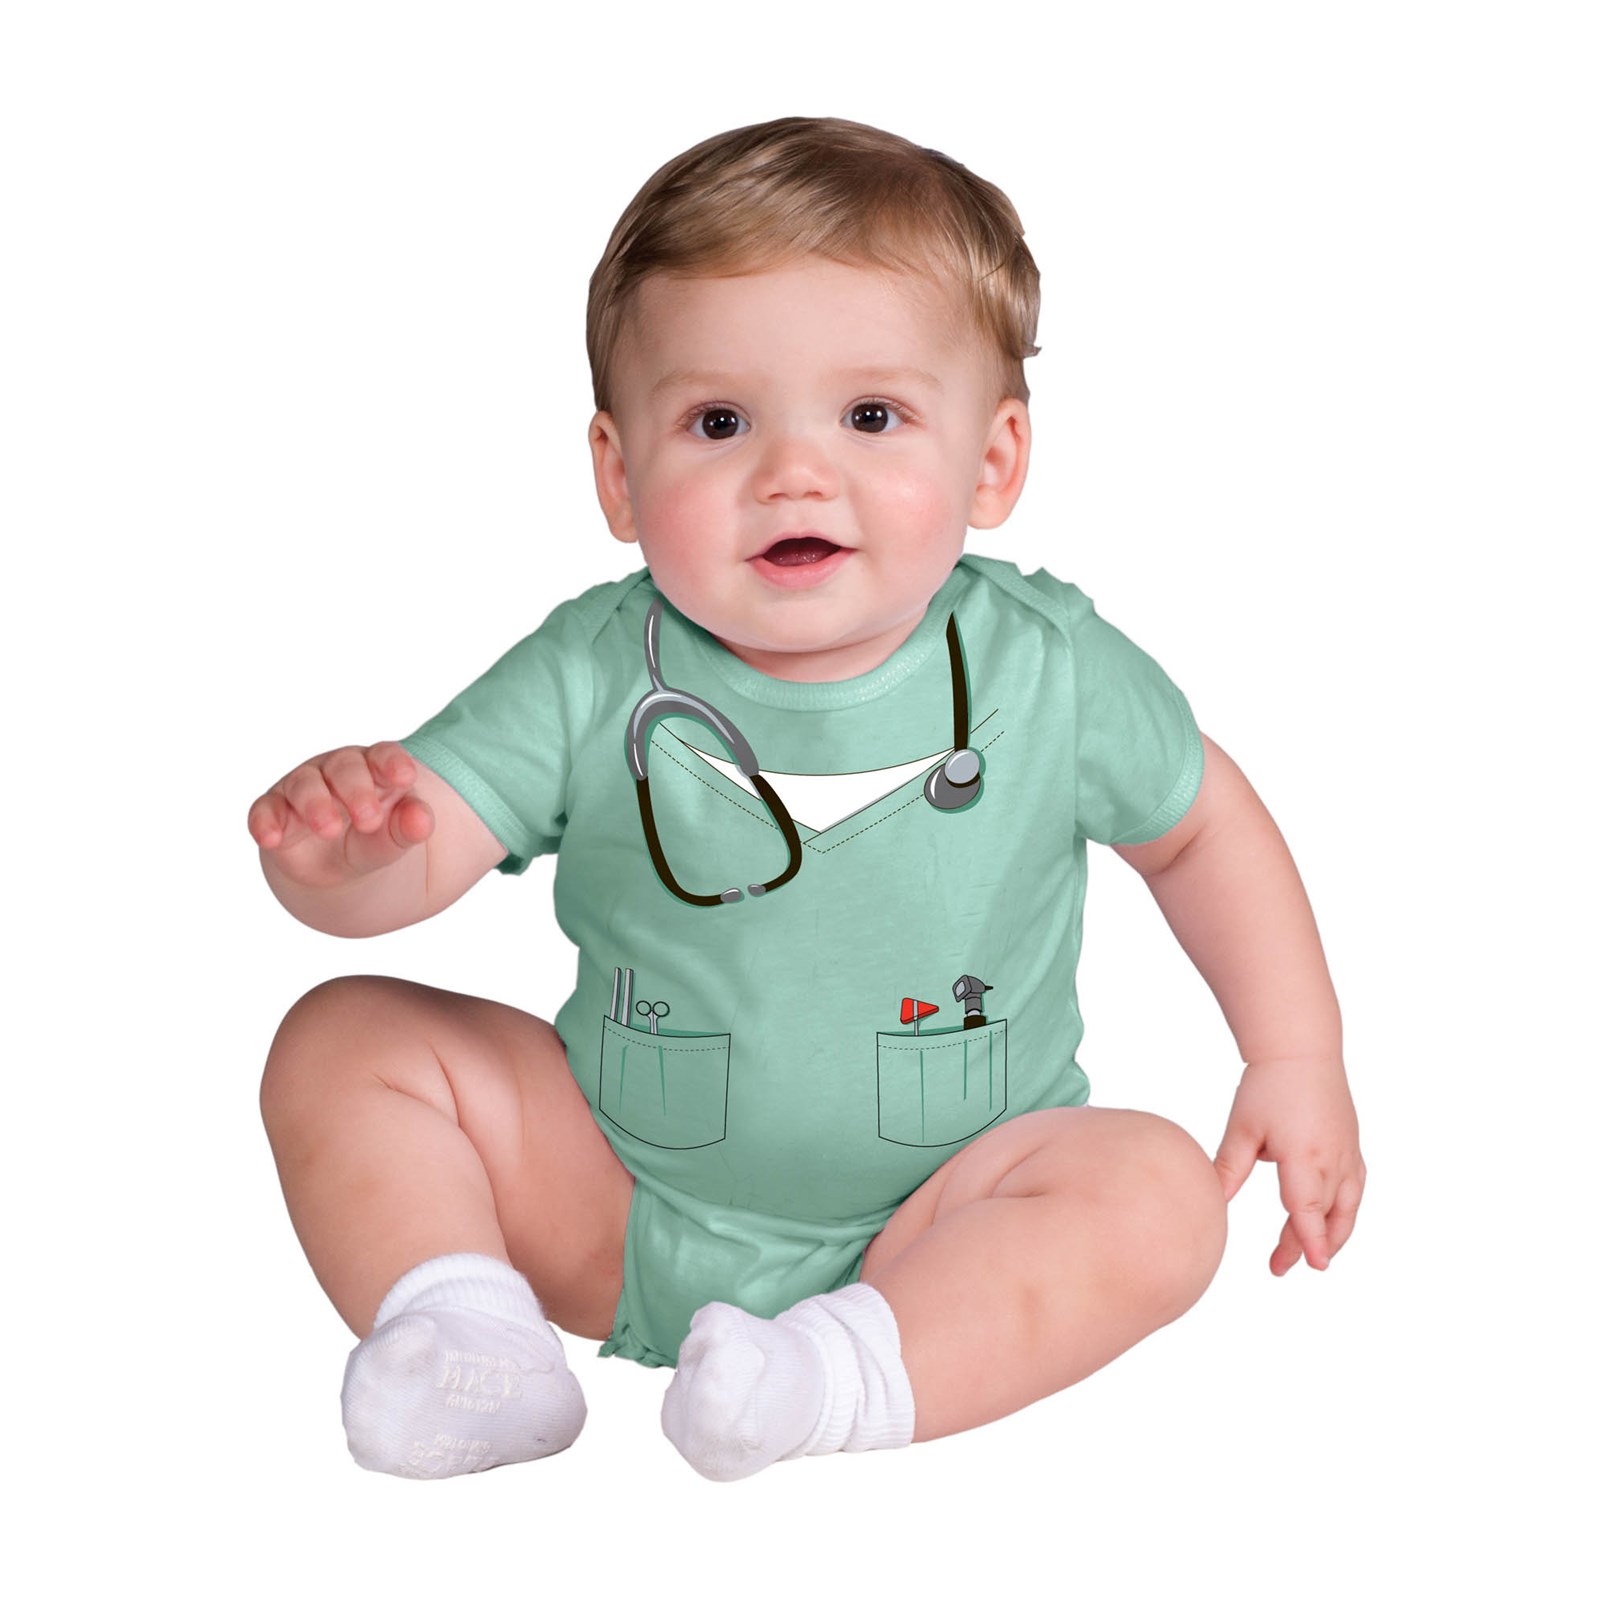 Baby Doctor Costume - image 1 of 2